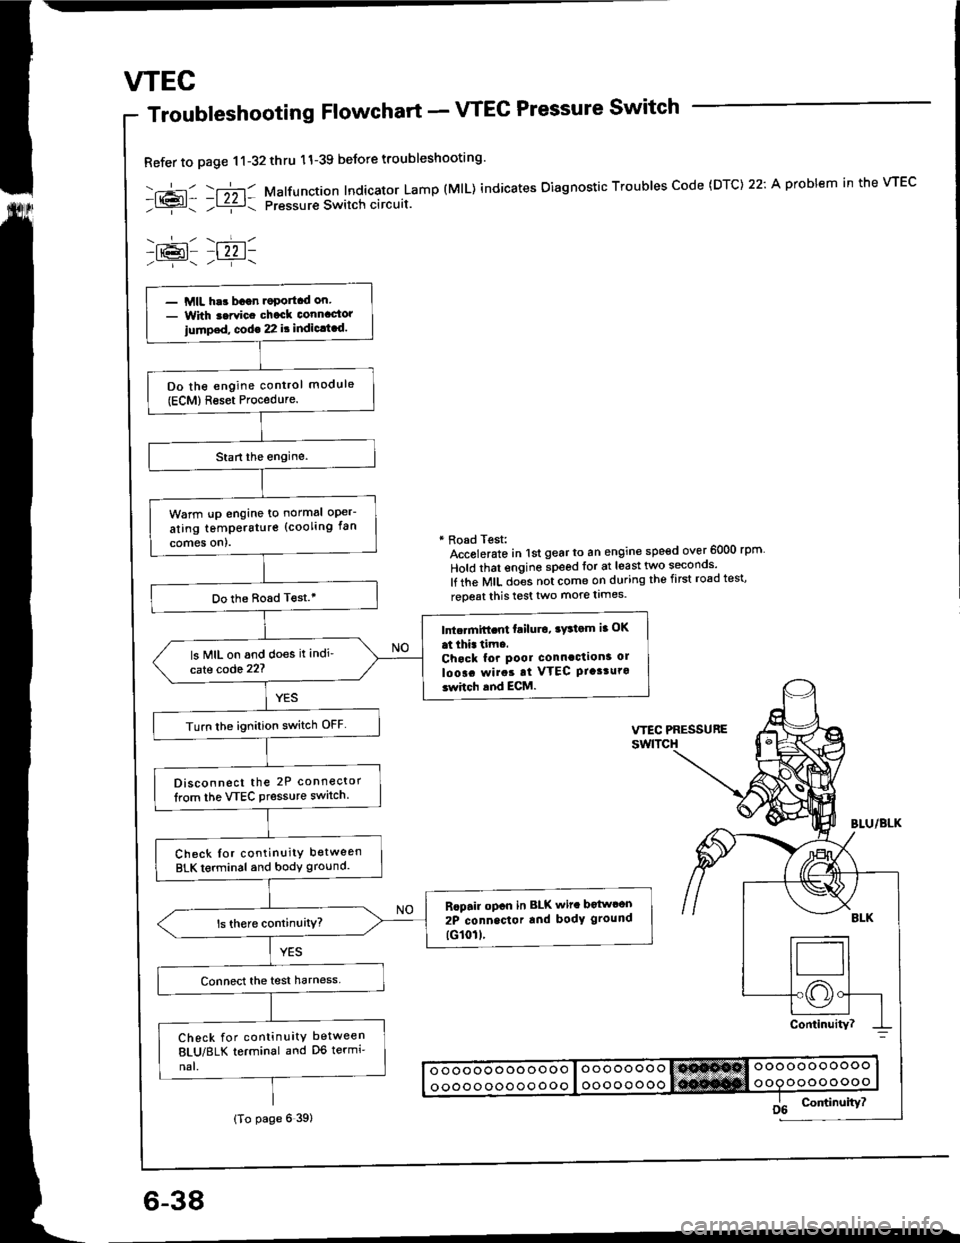 HONDA INTEGRA 1994 4.G Workshop Manual wEc
6-38
Troubleshooting Flowchart - VTEC Pressure Switch
Refer to page 11-32thru 11-39 beJore troubleshooting
-.+- -r";-r- Malfunction Indicator Lamp (MlL) indicates Oiagnostic Troubles Code (DTC) 2